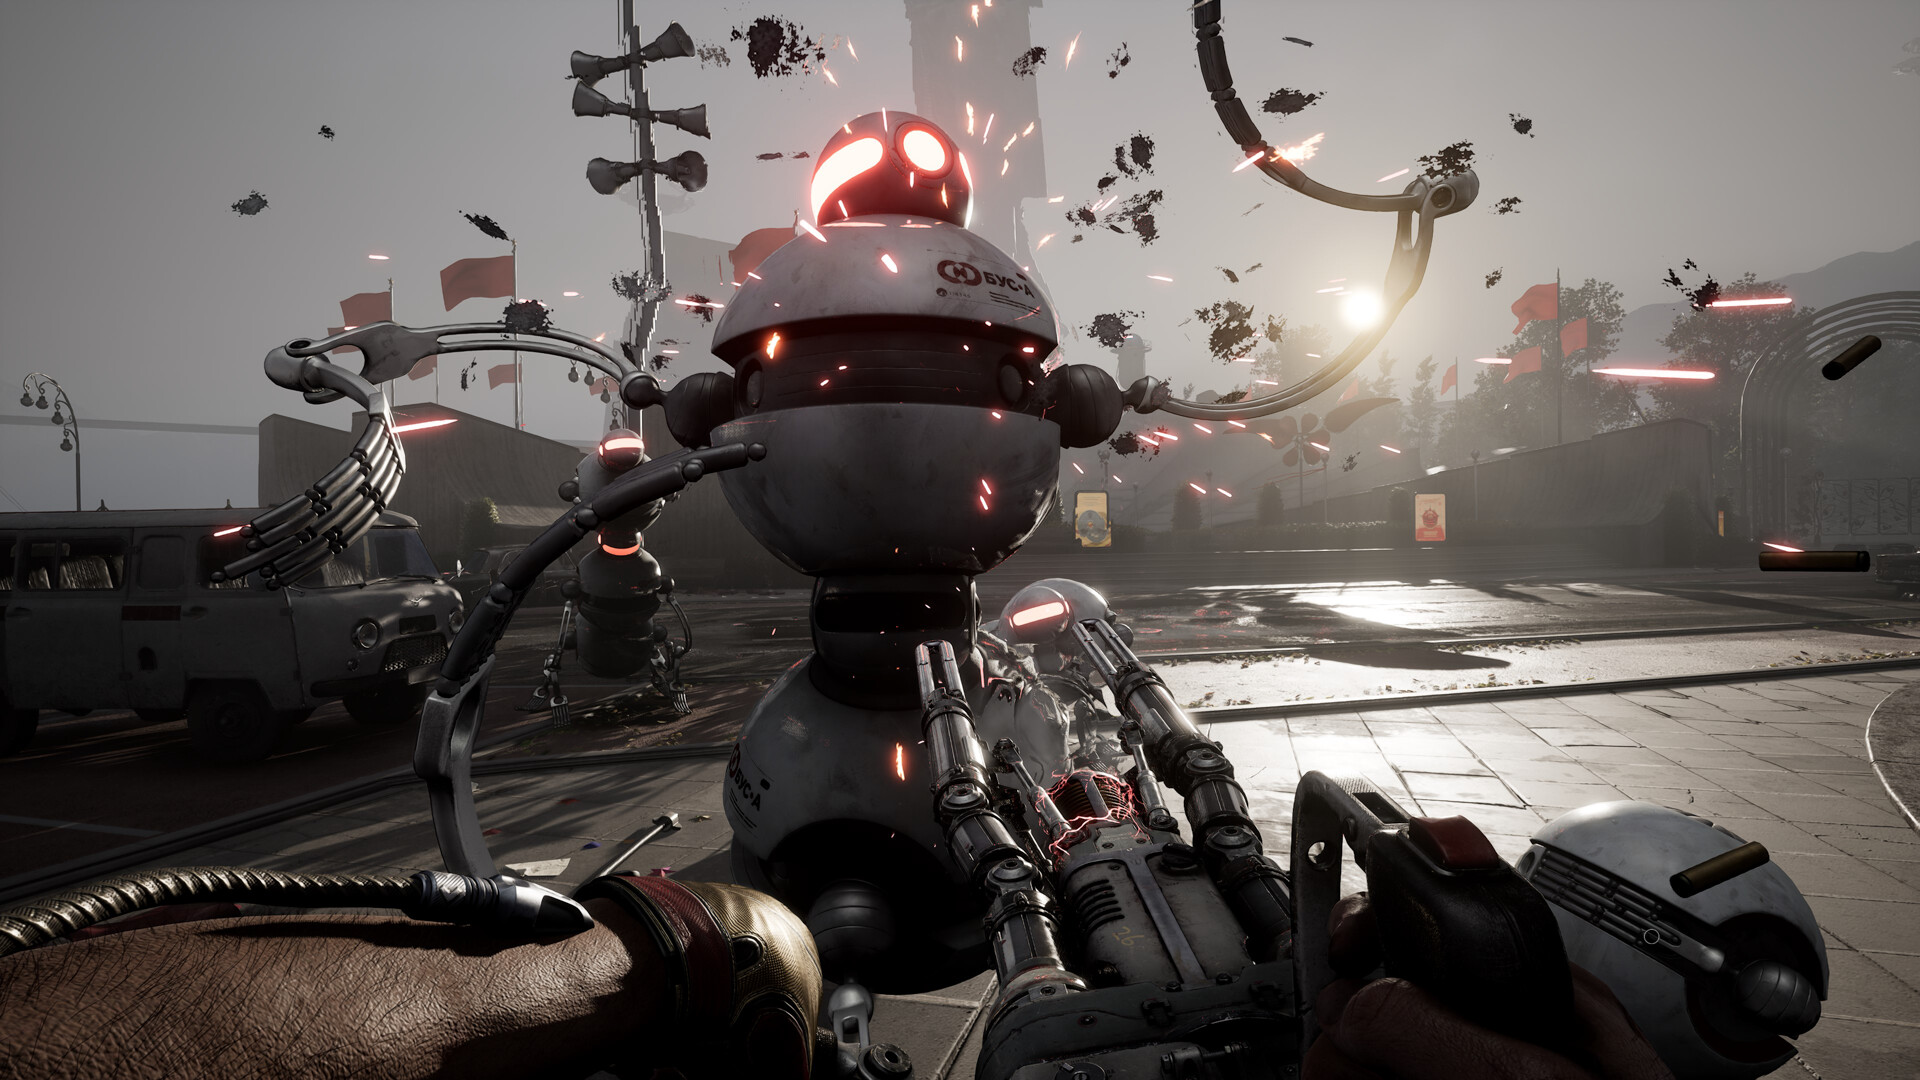 Atomic Heart – BEA-D Robot Revealed in New Teaser for First DLC